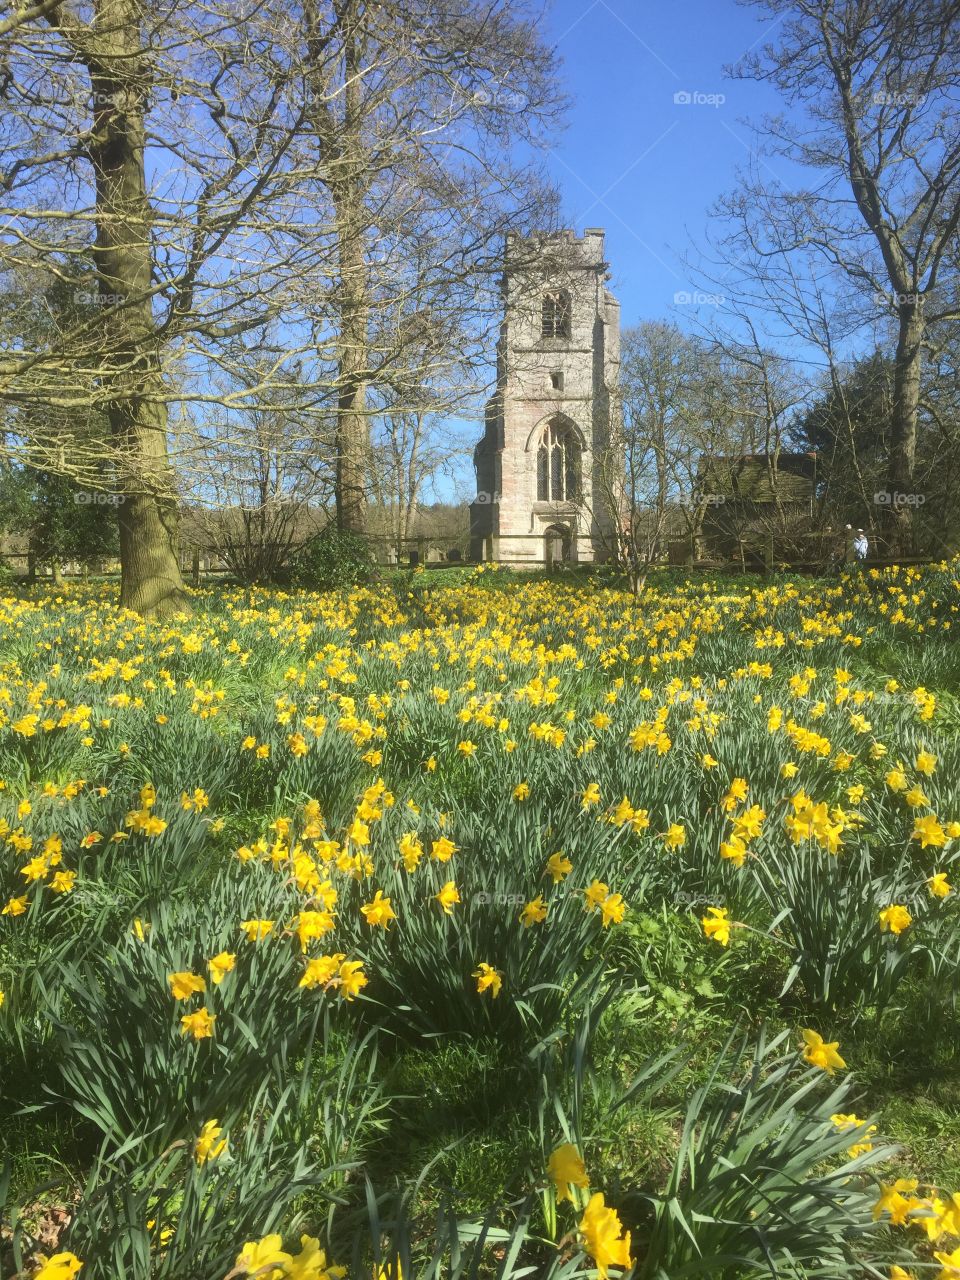 Church next to a field of yellow daffodils 